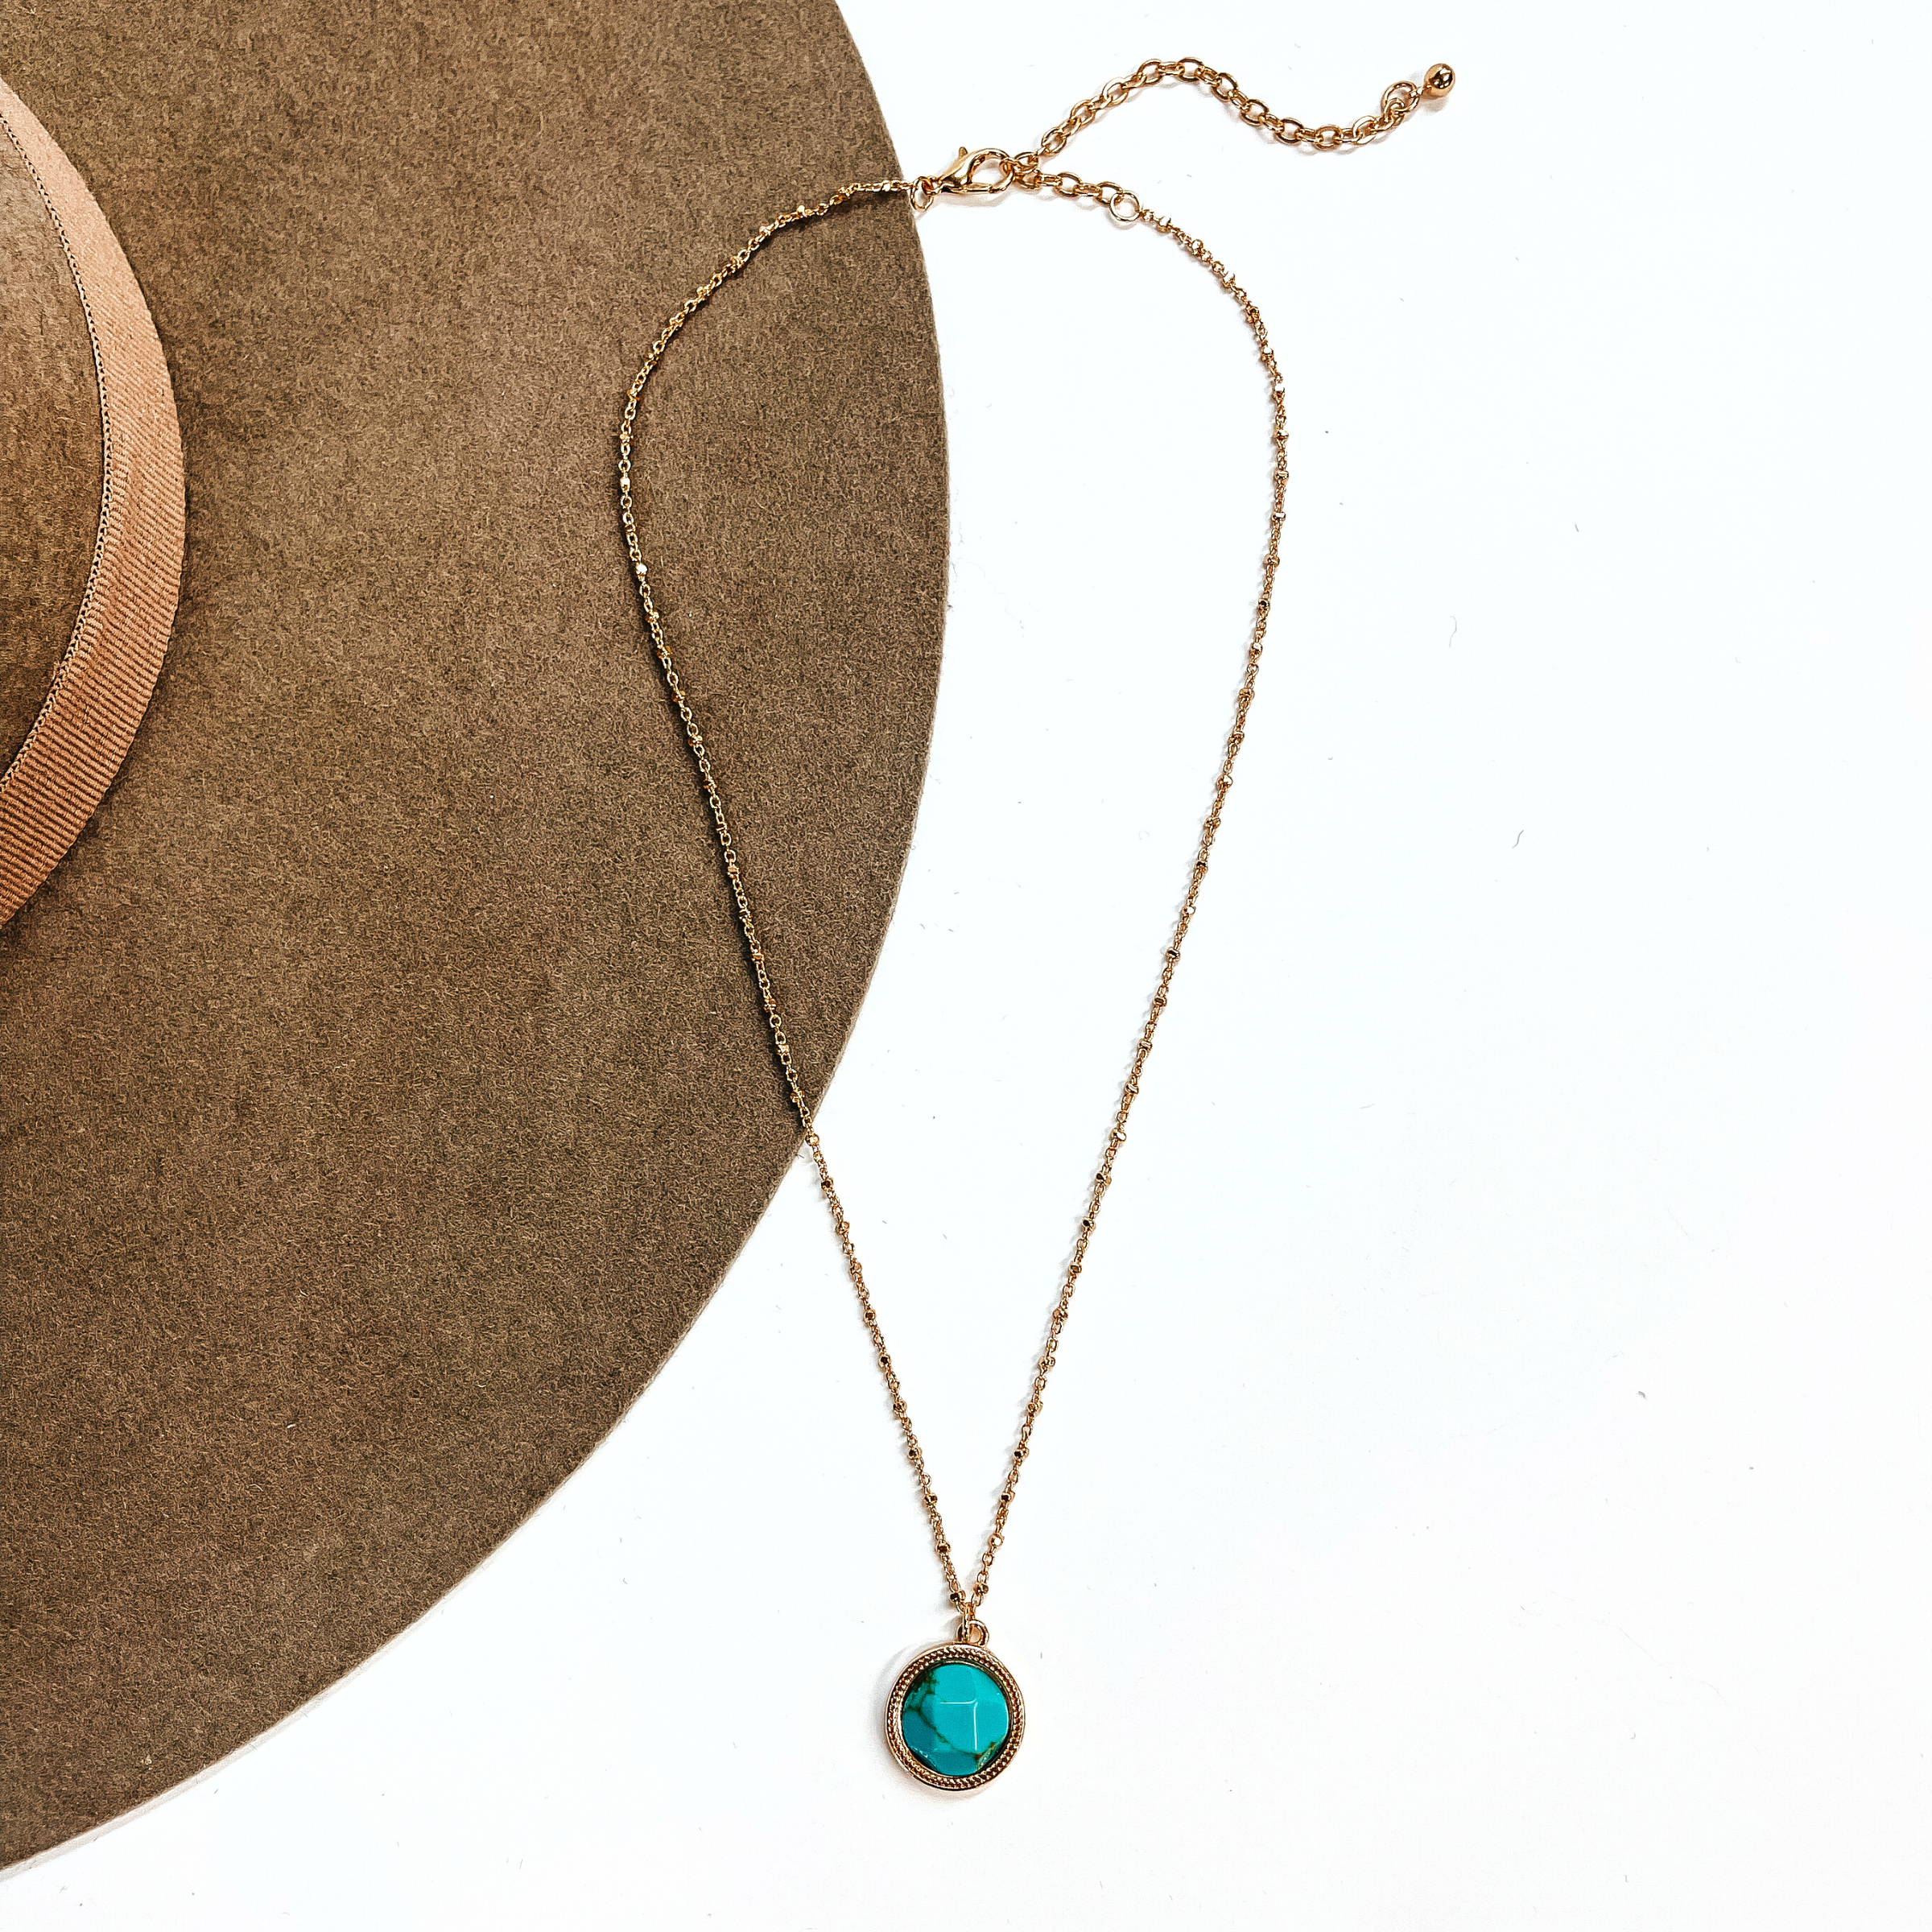 This is a thin gold tone chain necklace with a small circle pendant in the center. The  pendant has a turqouise stone shaped as a circle, the stone is in a gold setting. This  necklace is laying on a white background and on a light brown felt hat brim.